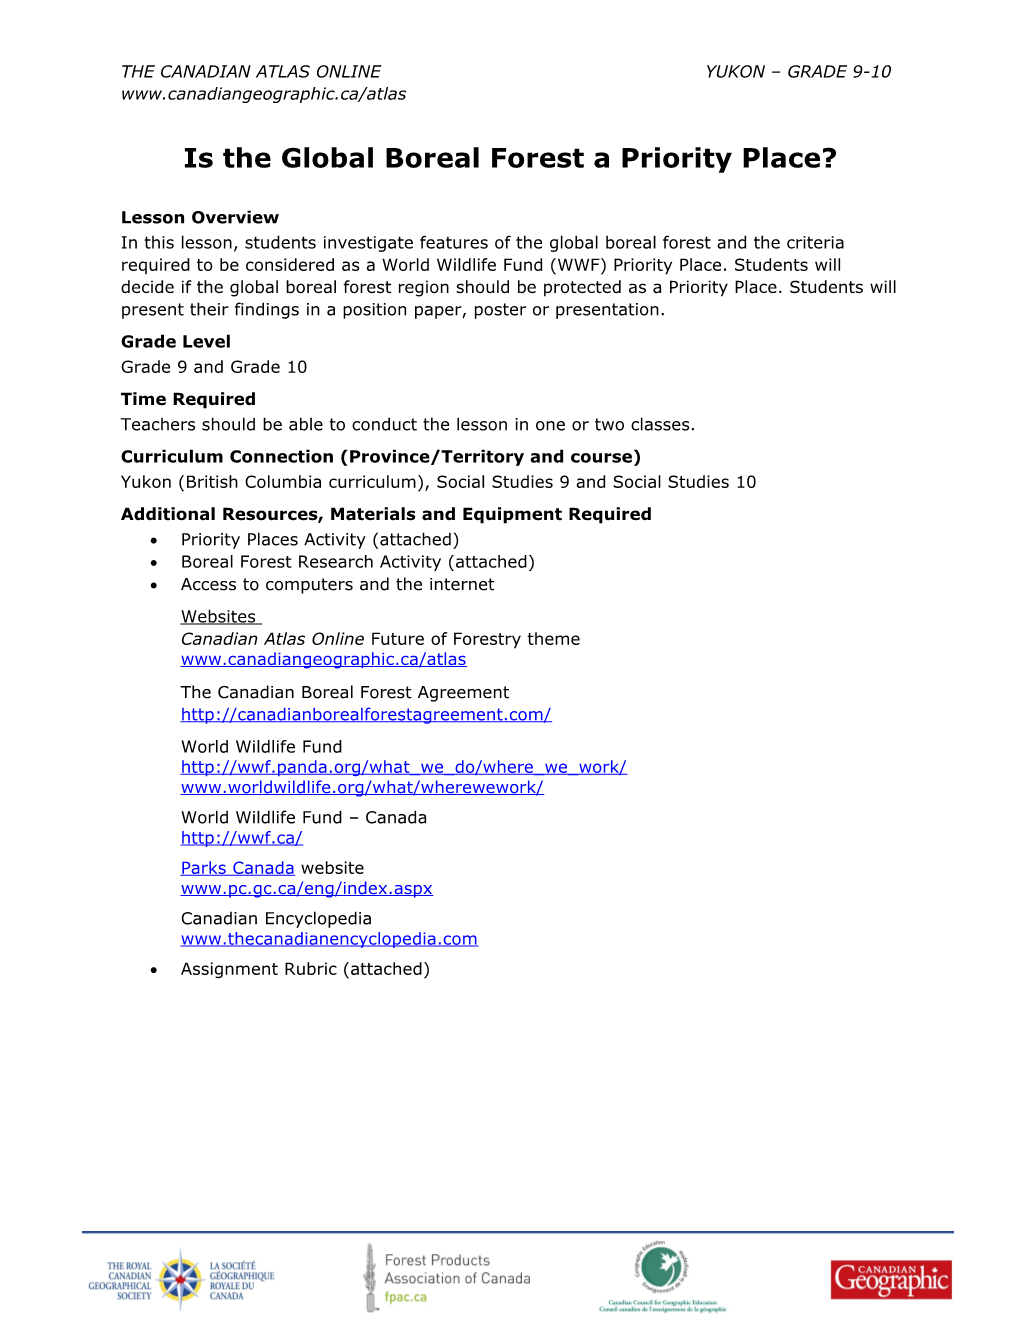 Is the Global Boreal Forest a Priority Place?